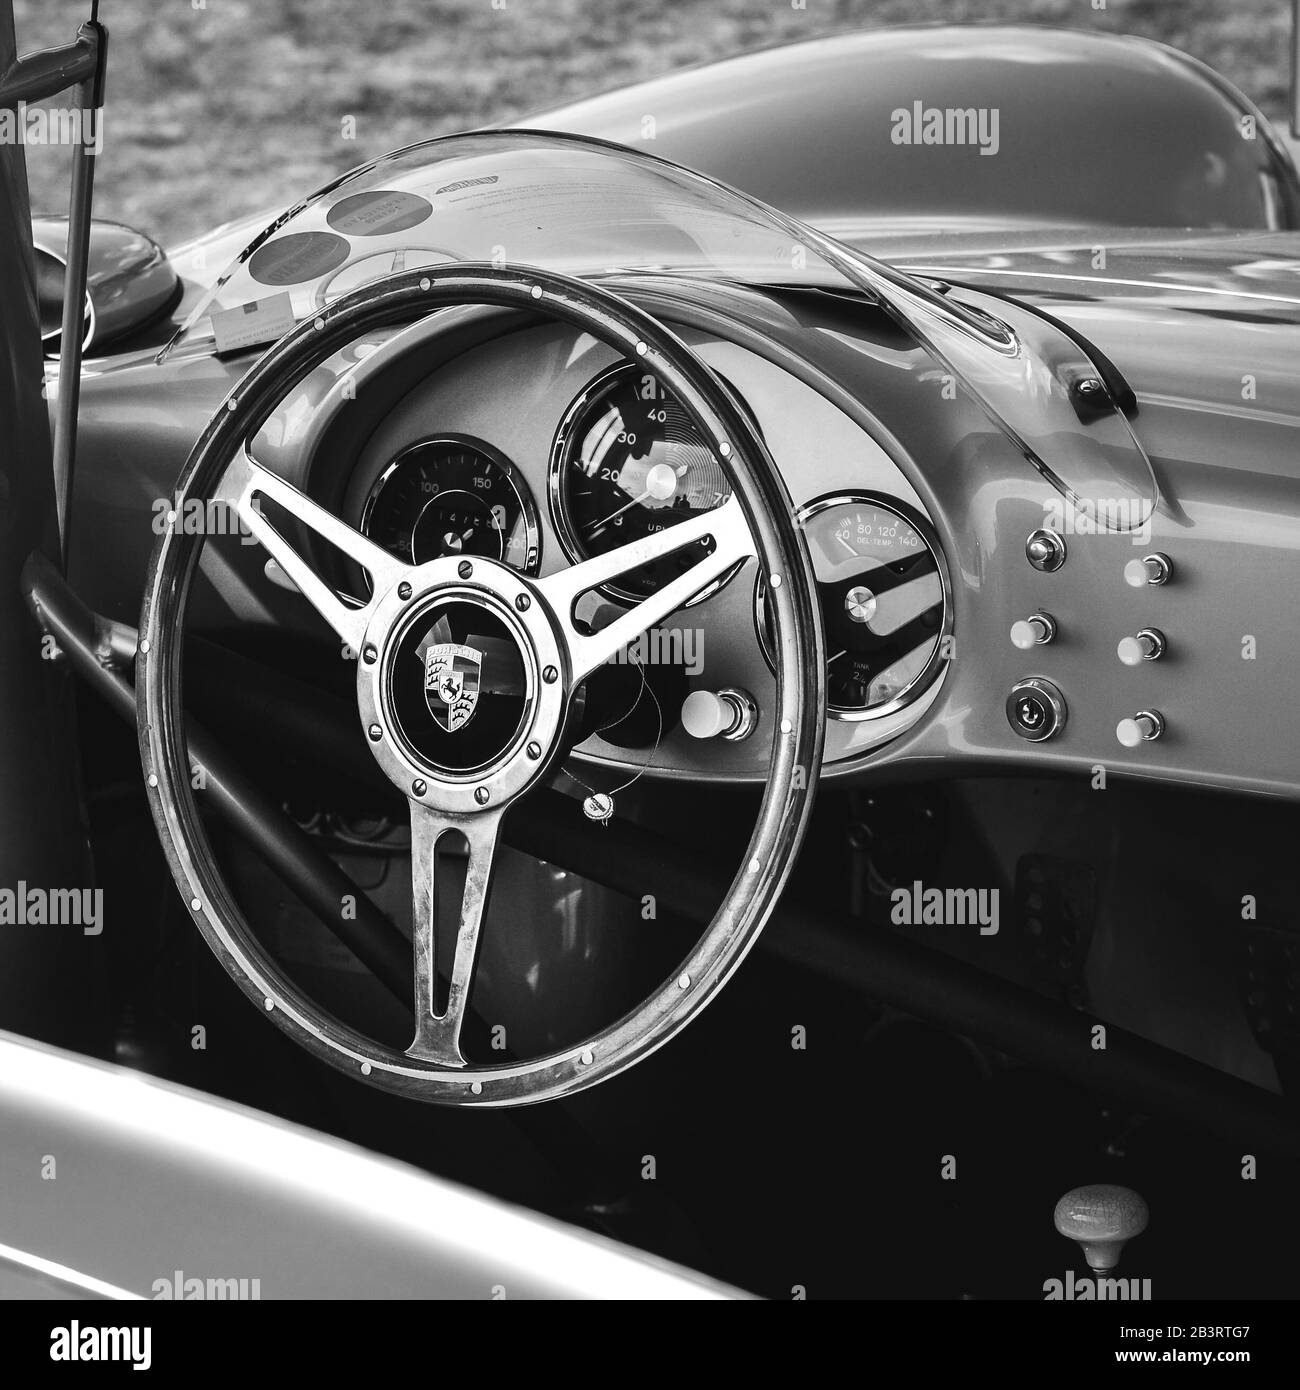 Porsche 550 RS Spyder taken at Salon Prive at Blenheim Palace in August 2018. Stock Photo